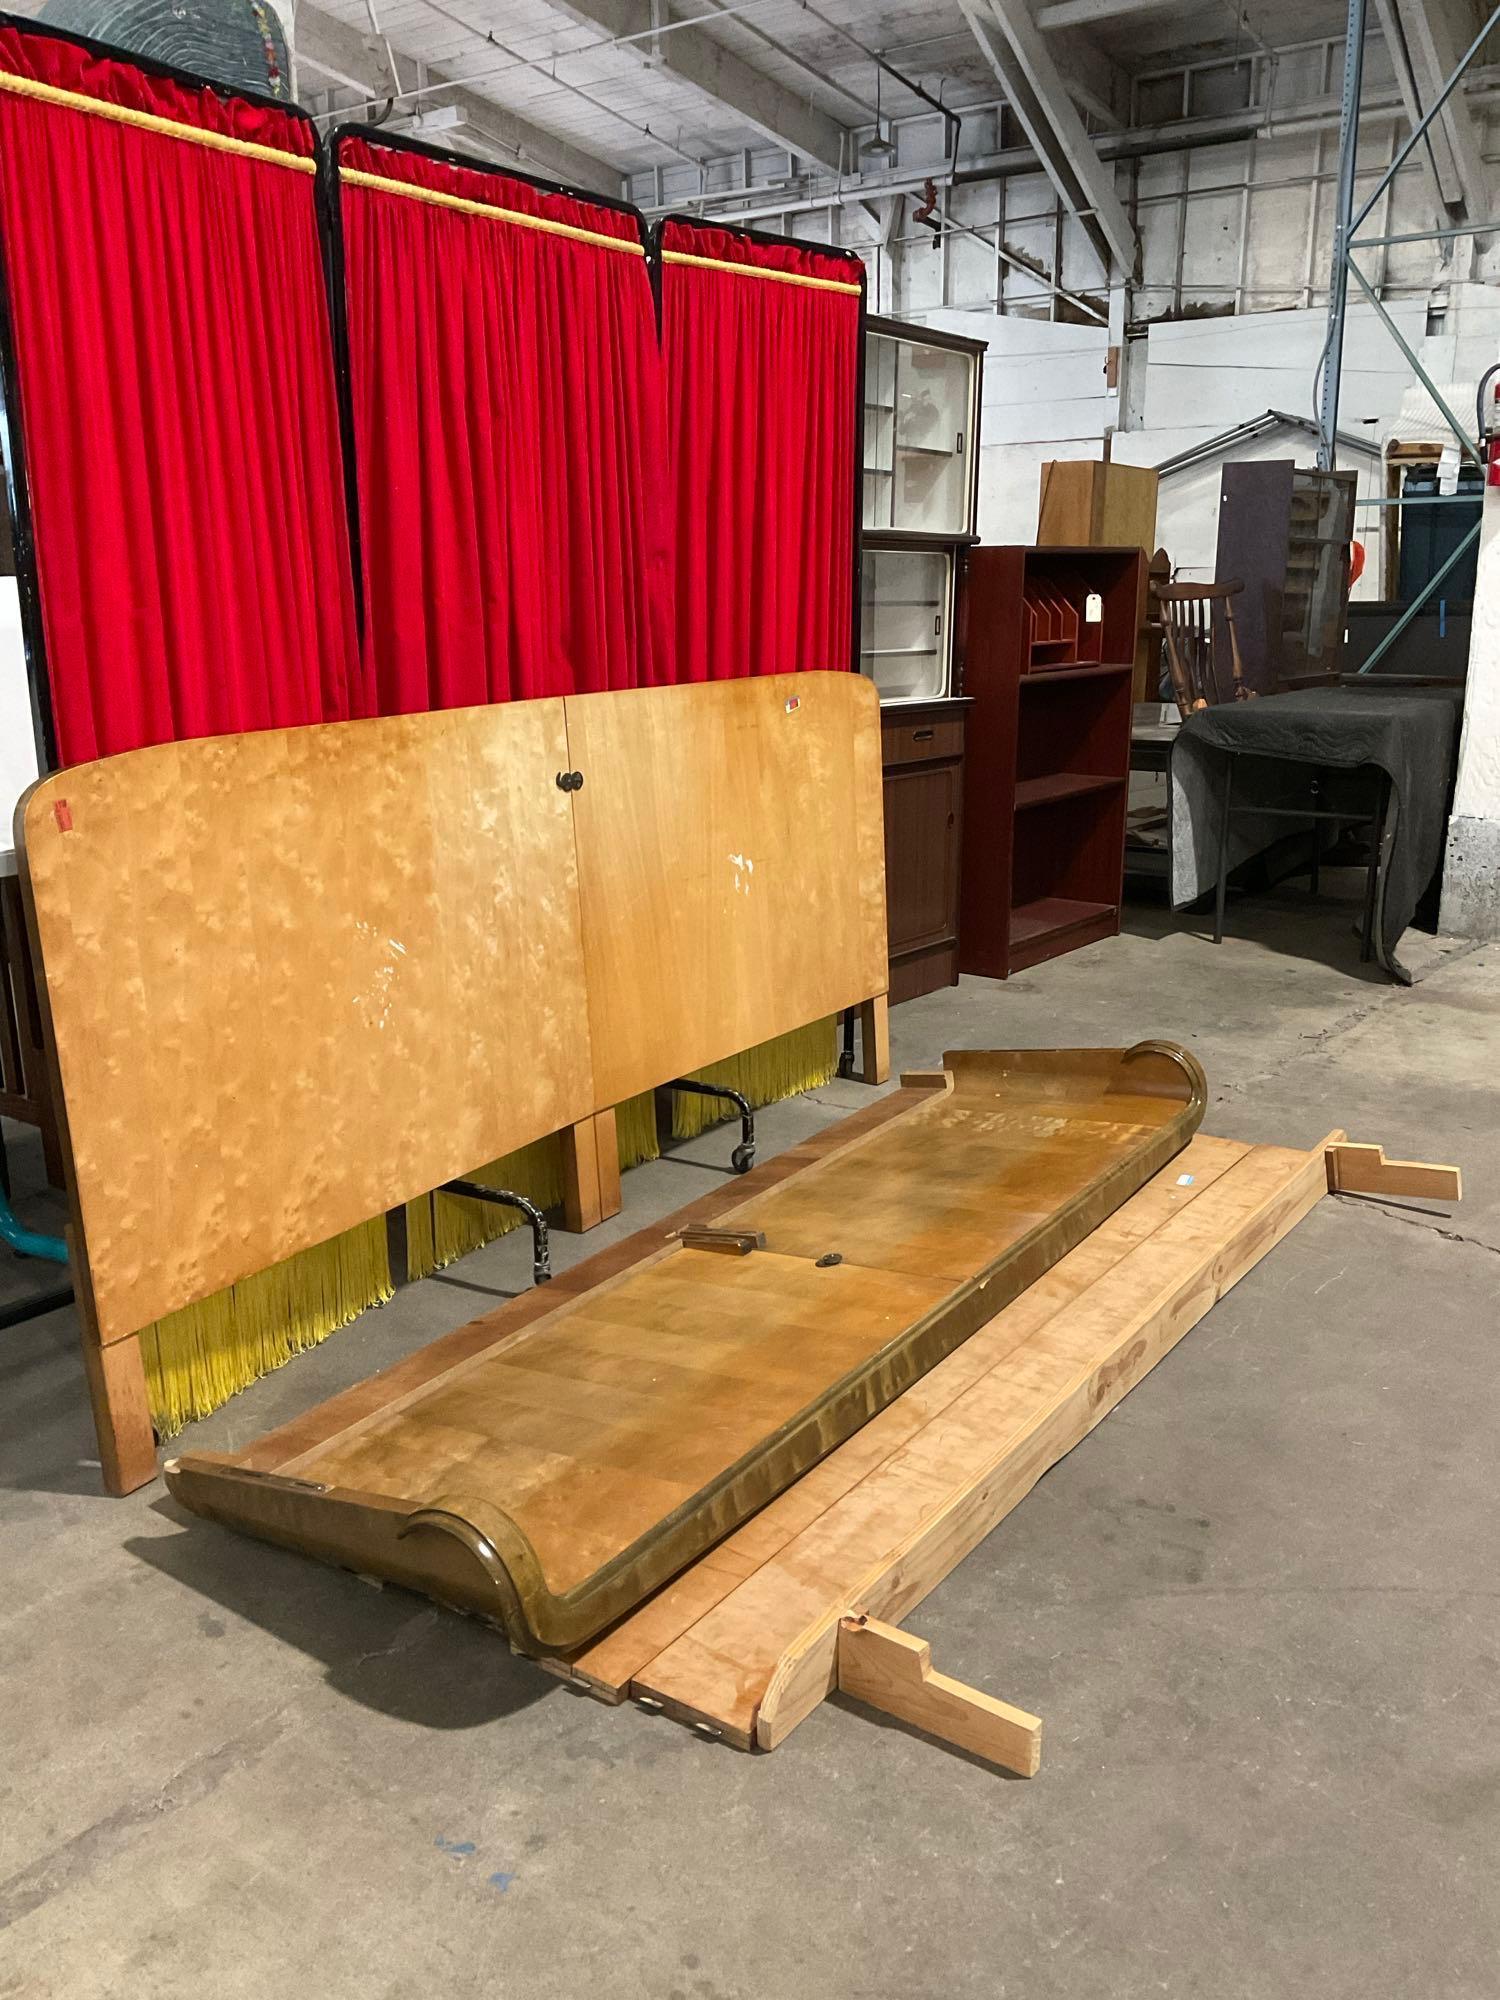 Vintage German Mid-Century Modern Maple Split King Bed Frame. Stands 37" Tall. See pics.